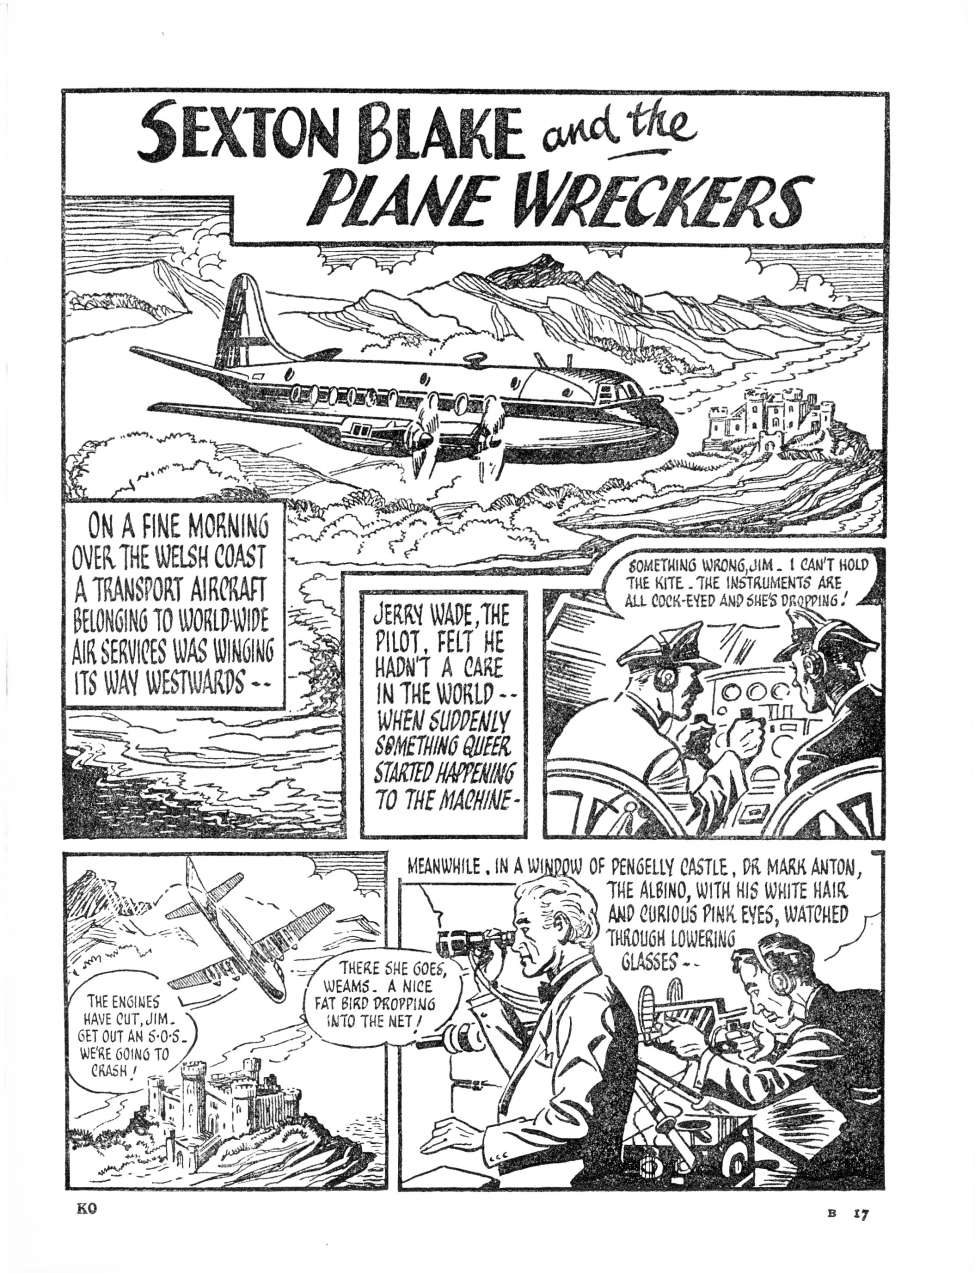 Book Cover For Sexton Blake - The Plane Wreckers 1954